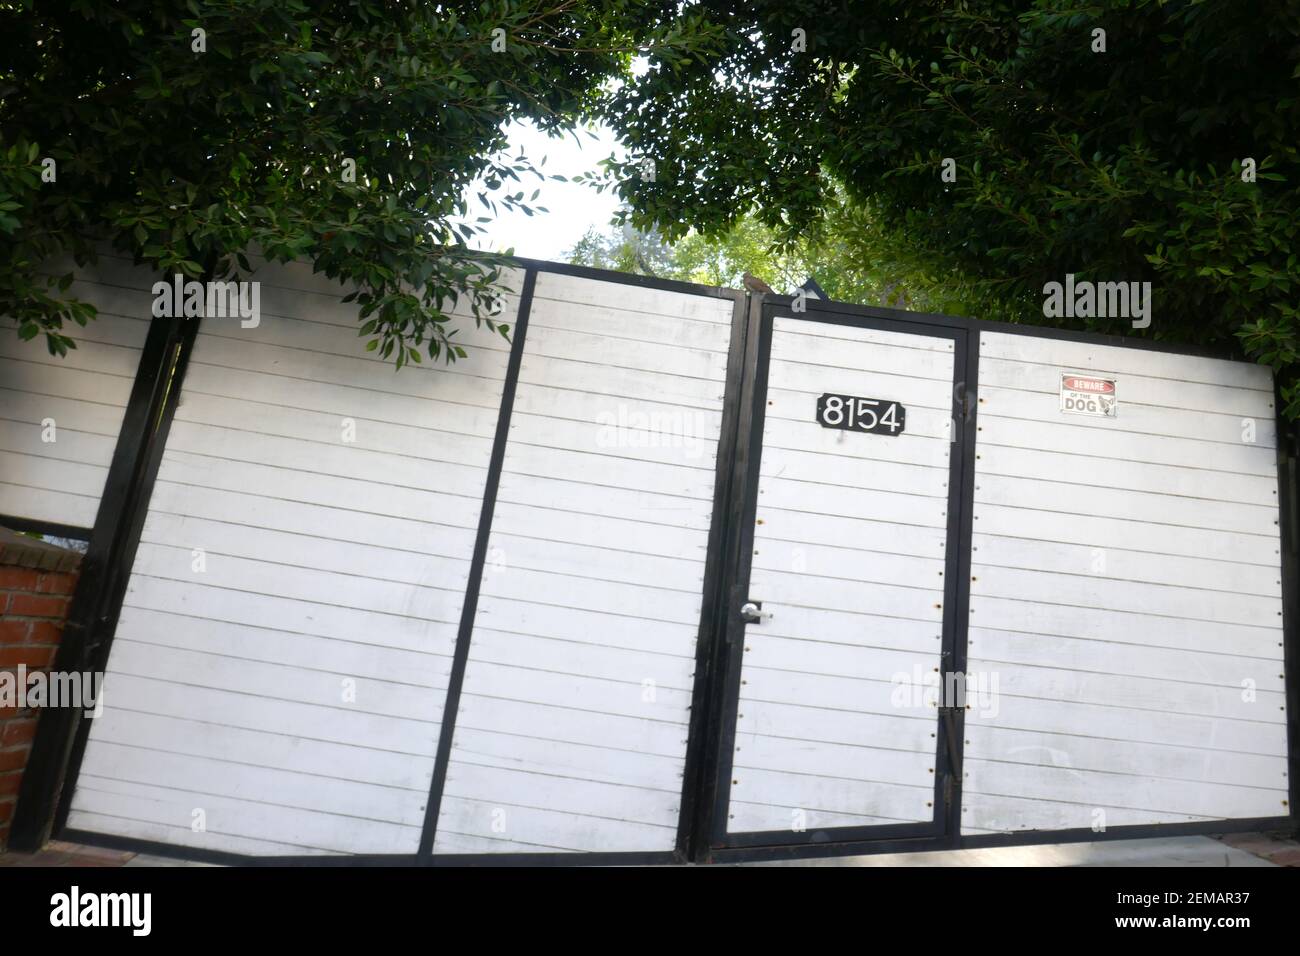 Los Angeles, California, USA 24th February 2021 A general view of atmosphere of actor Joaquin Phoenix's home/house February 24, 2021 Los Angeles, California, USA. Photo by Barry King/Alamy Stock Photo Stock Photo